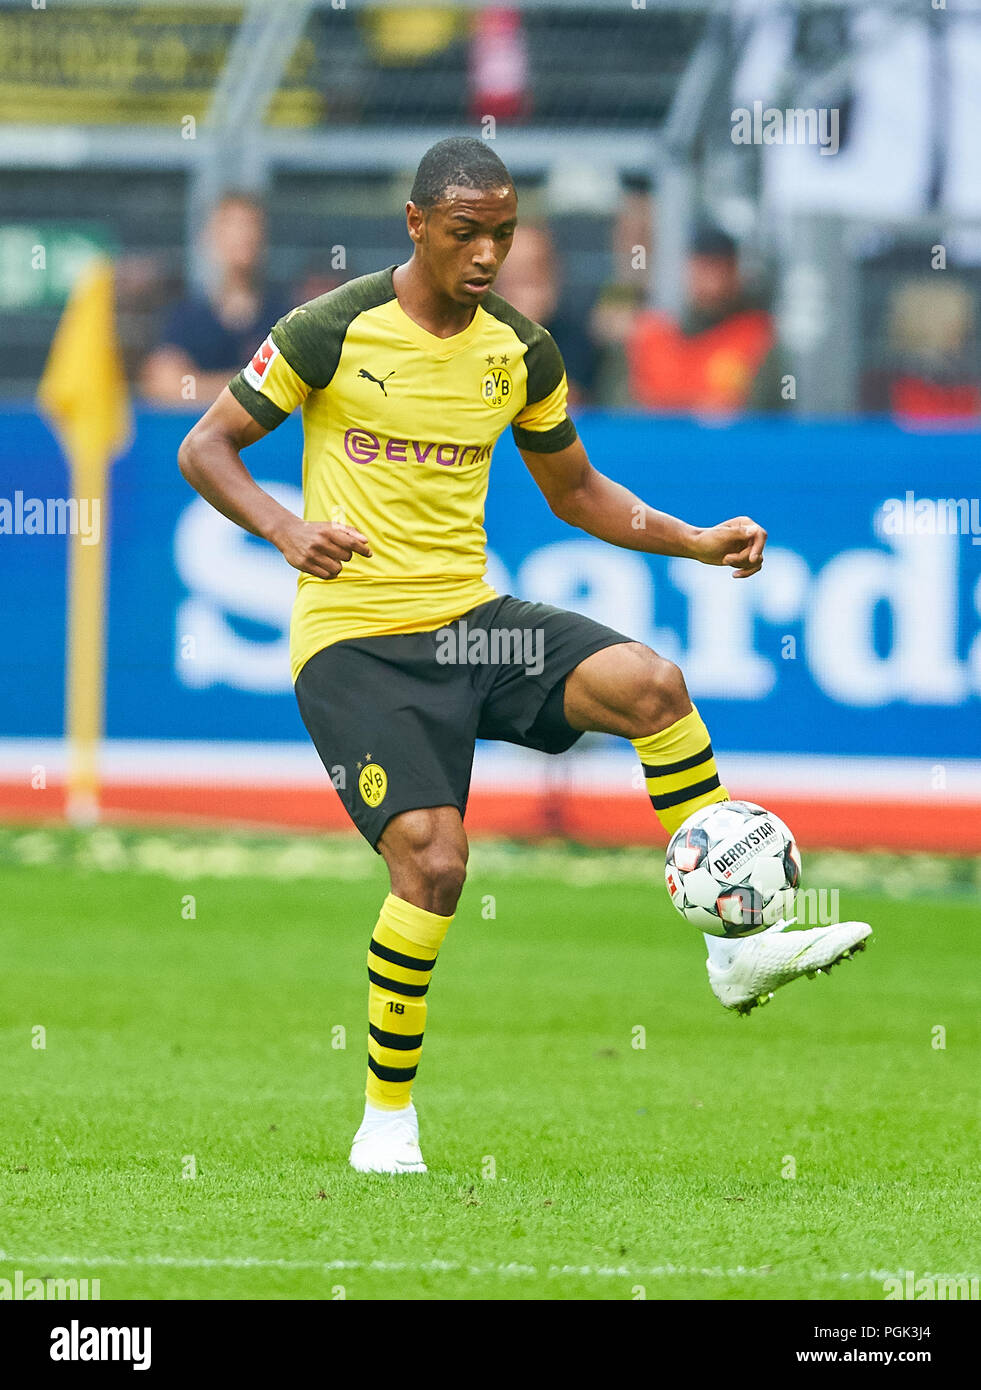 BVB-RB Leipzig Soccer, Dortmund, August 26, 2018 Abdou-Lakhad DIALLO, BVB 4  drives, controls the ball, action, full-size, Single action with ball, full  body, whole figure, cutout, single shots, ball treatment, pick-up, header,